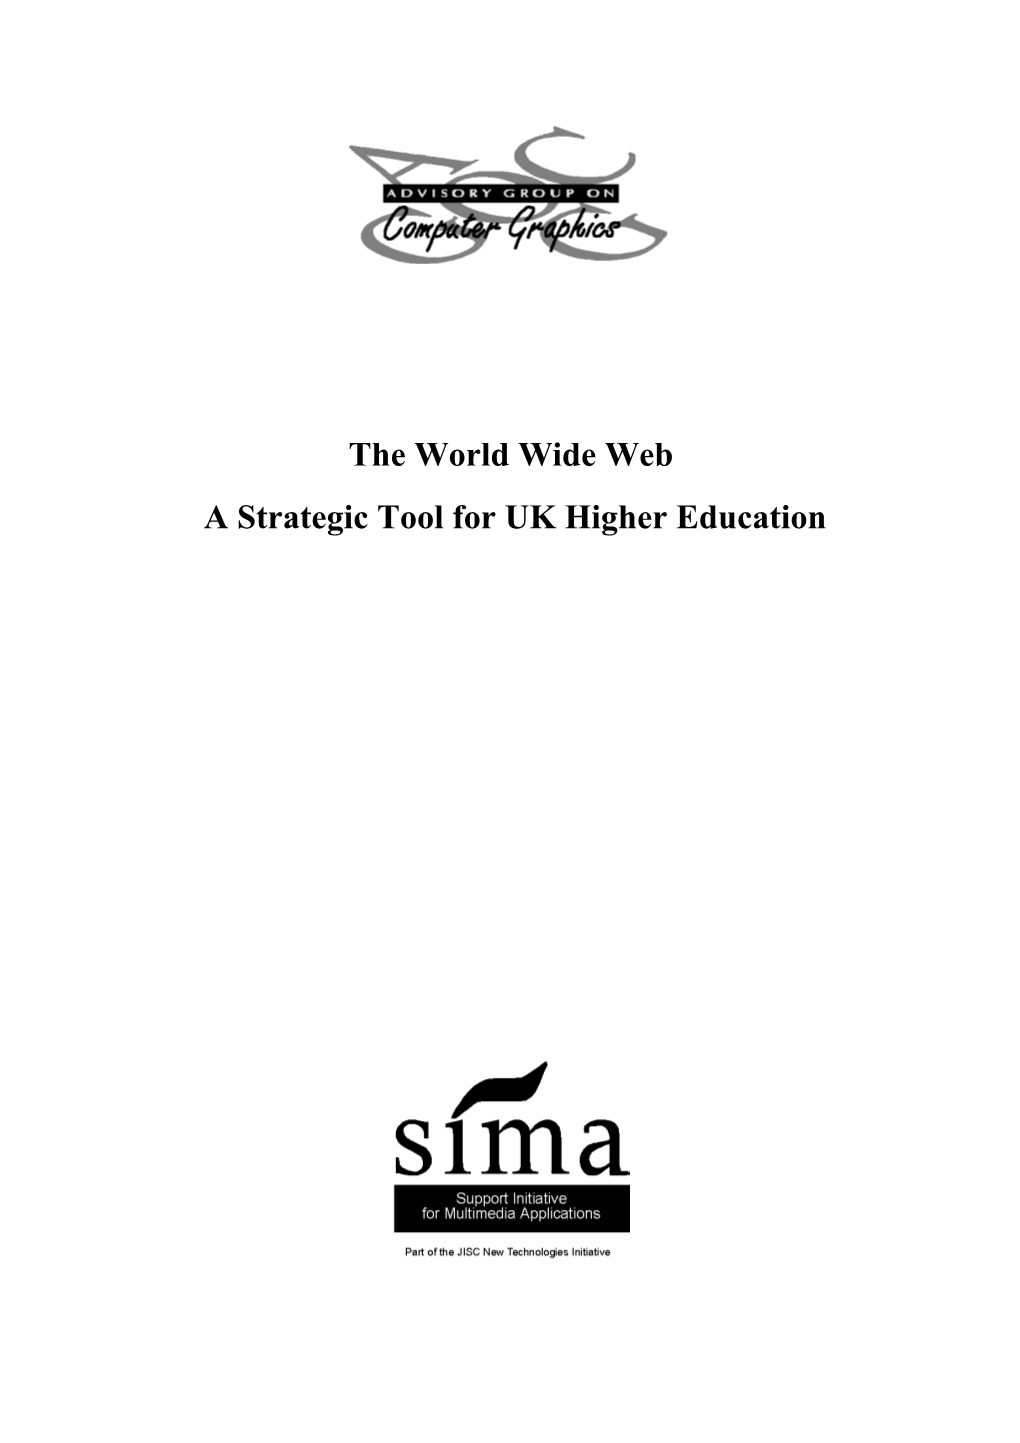 The World Wide Web a Strategic Tool for UK Higher Education CONTENTS